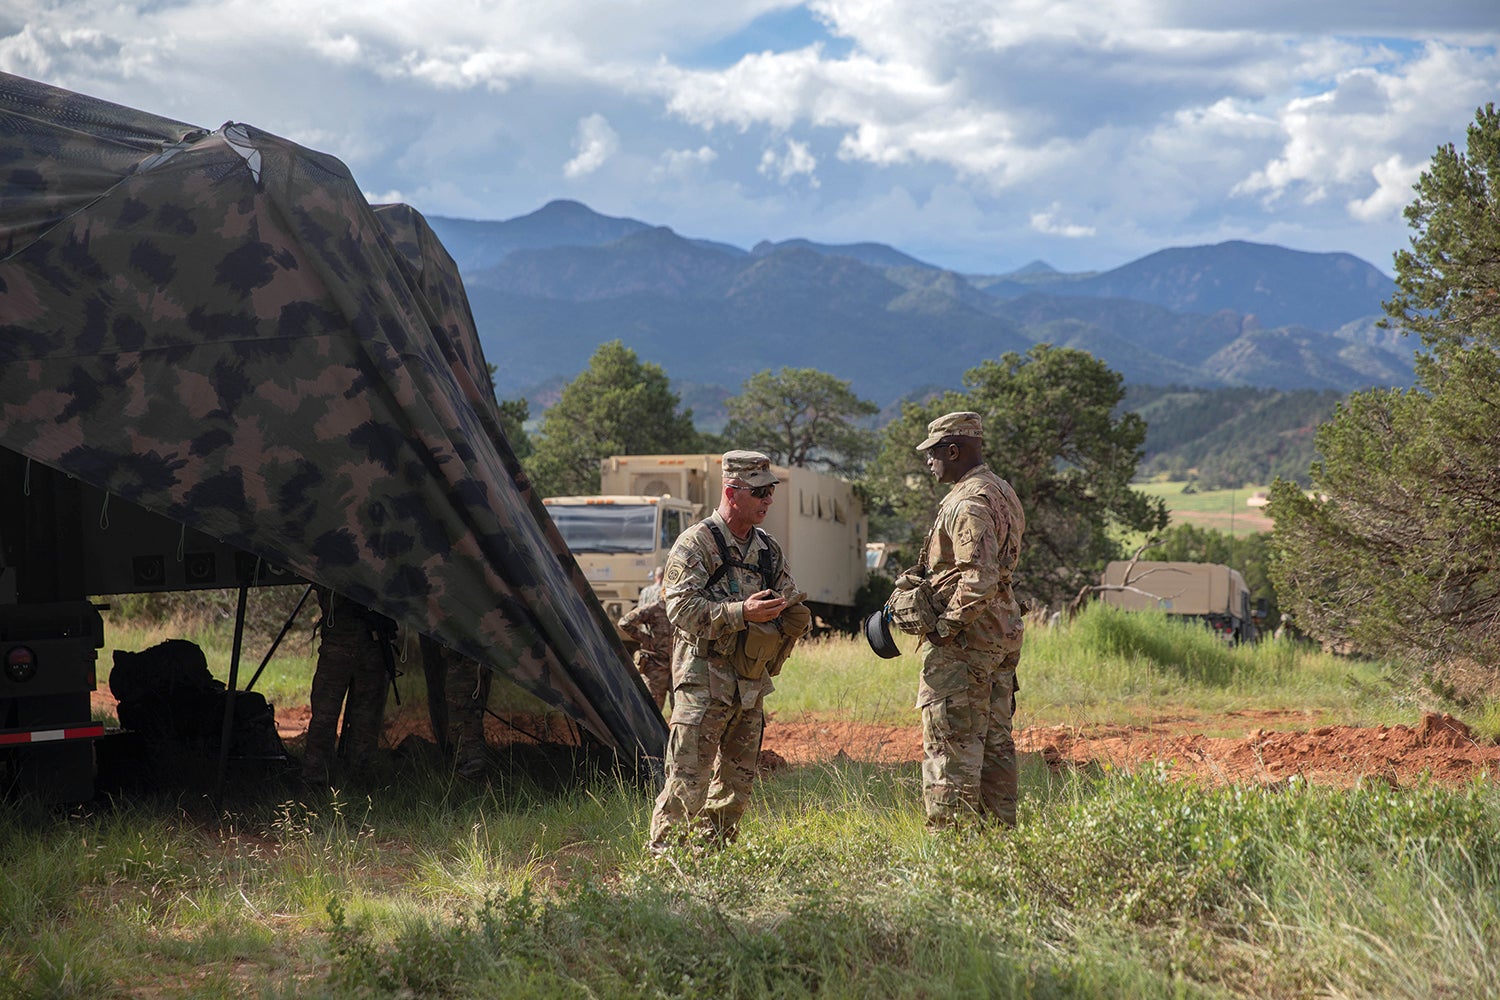 Soldiers work together during a command post exercise at Fort Carson, Colorado. (Credit: U.S. Army/Spc. Joshua Zayas)